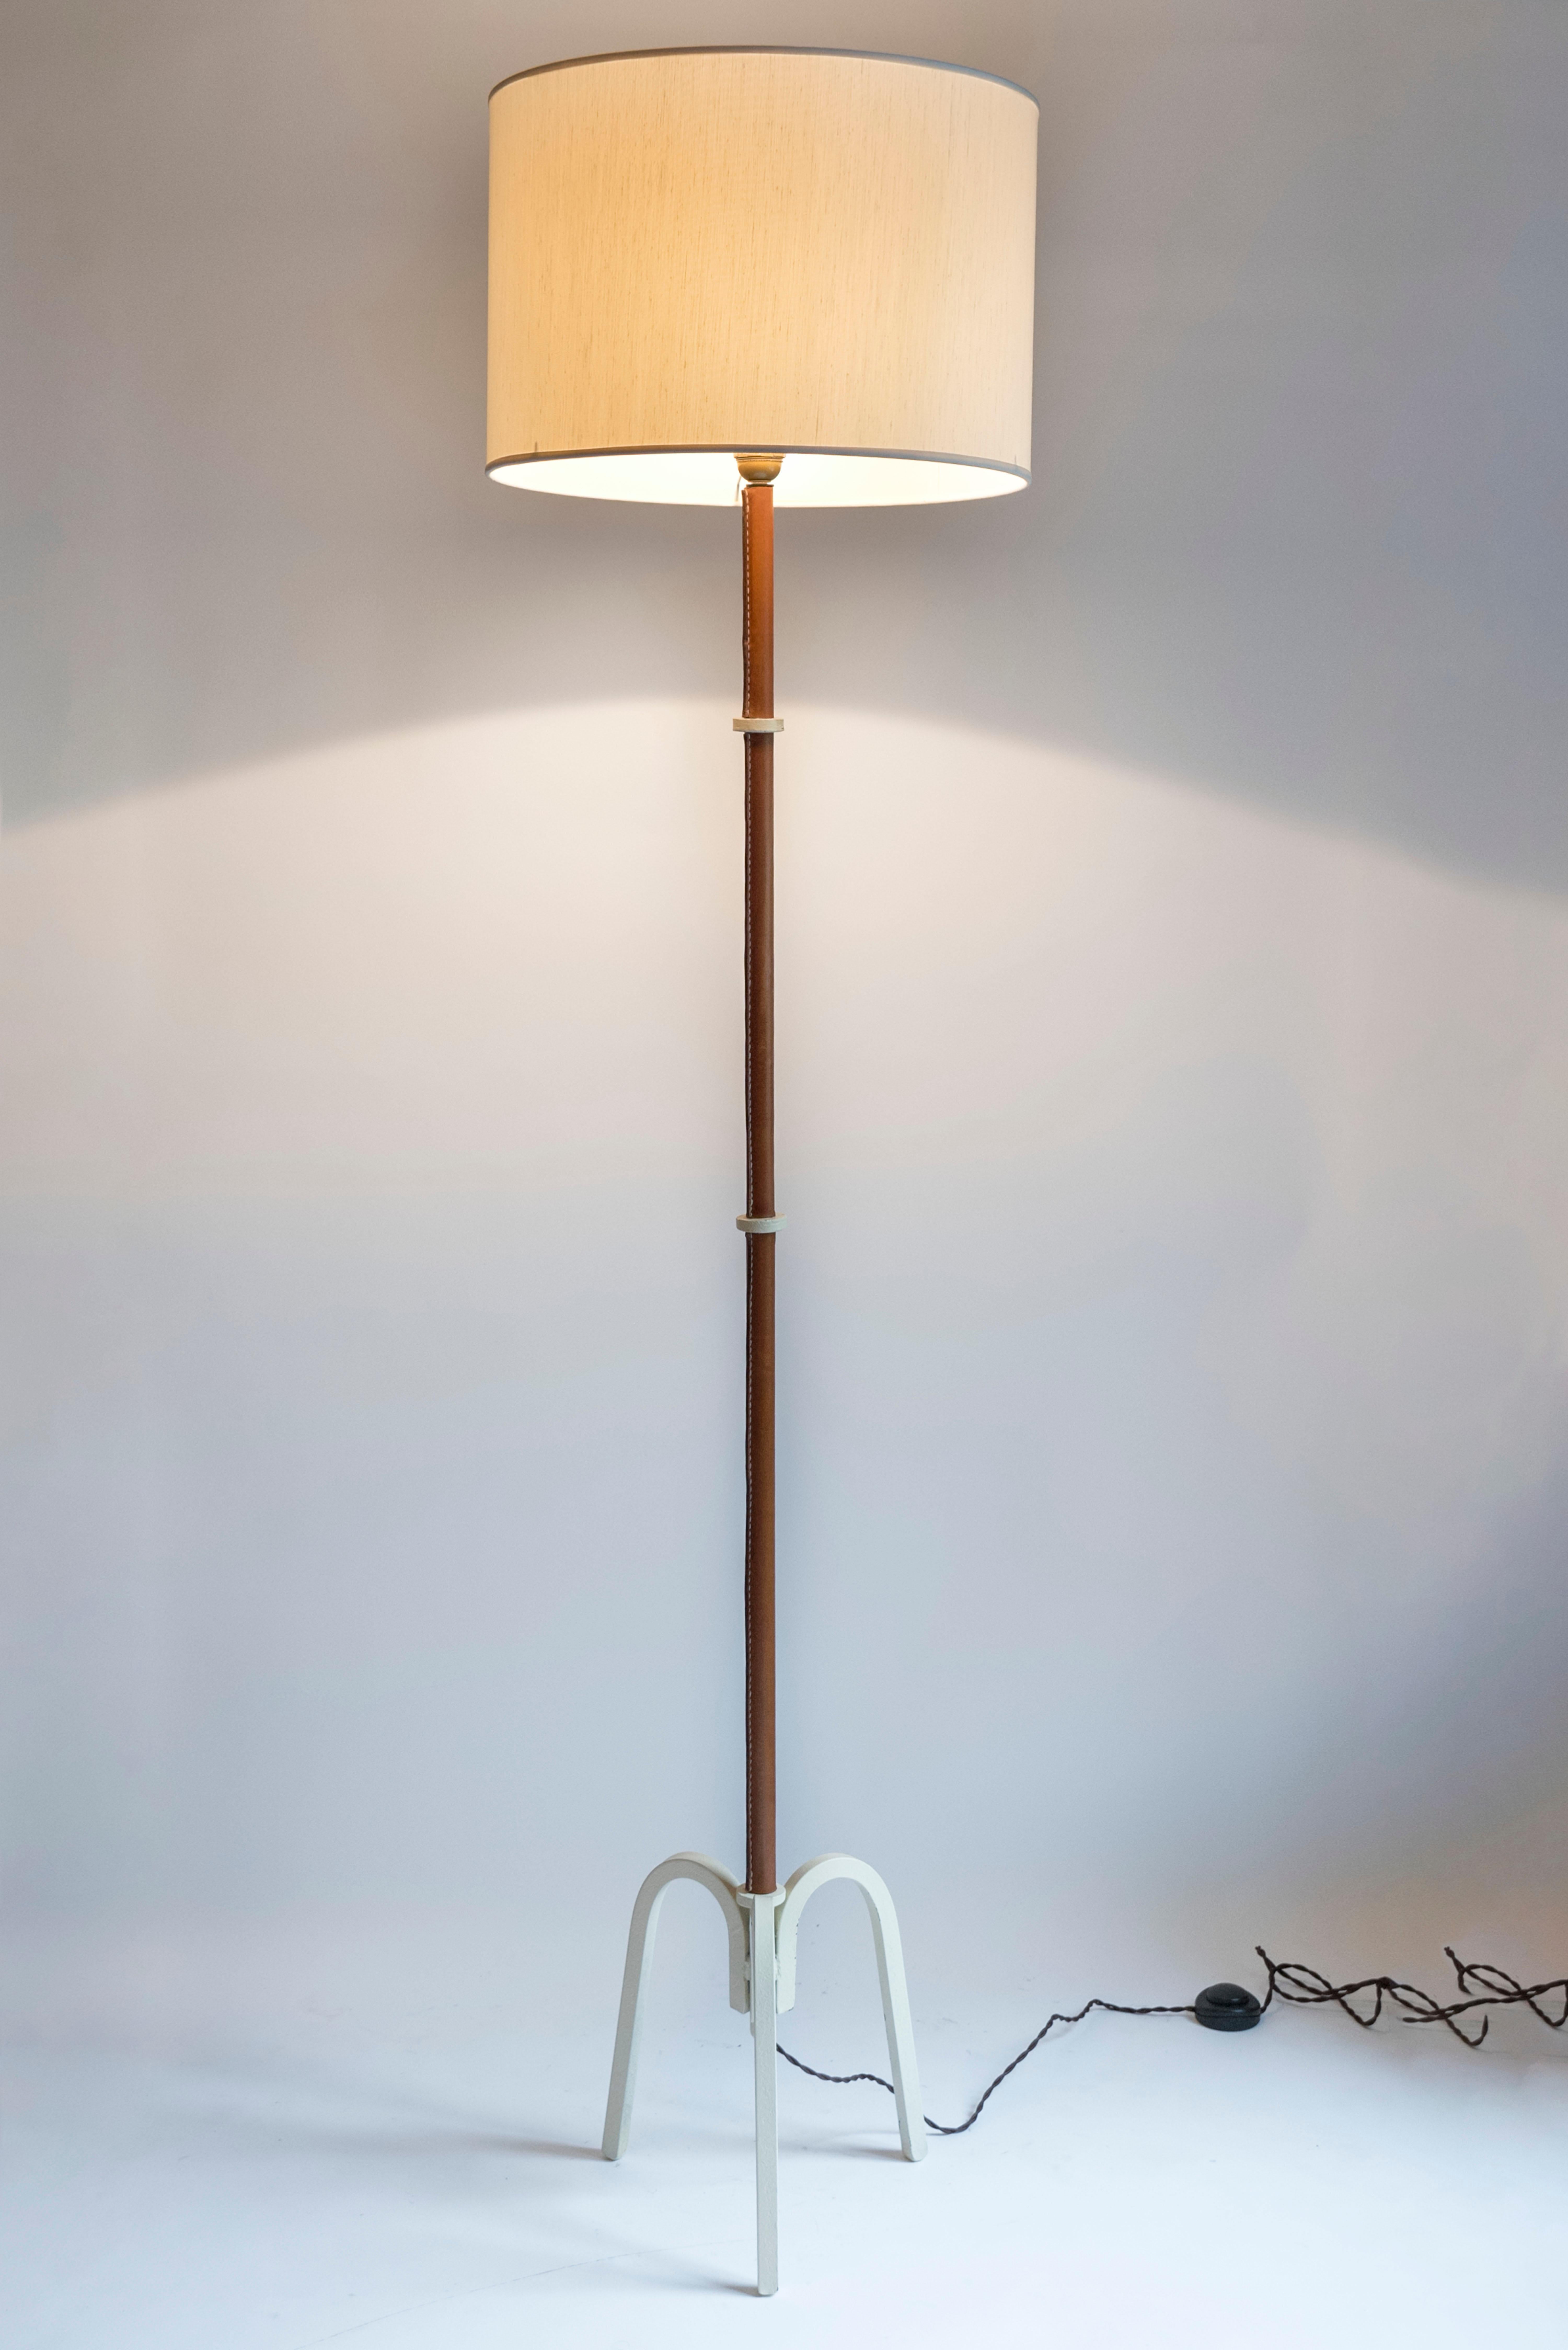 Stitched Leather floor lamp by Jacques Adnet In Good Condition For Sale In Bois-Colombes, FR